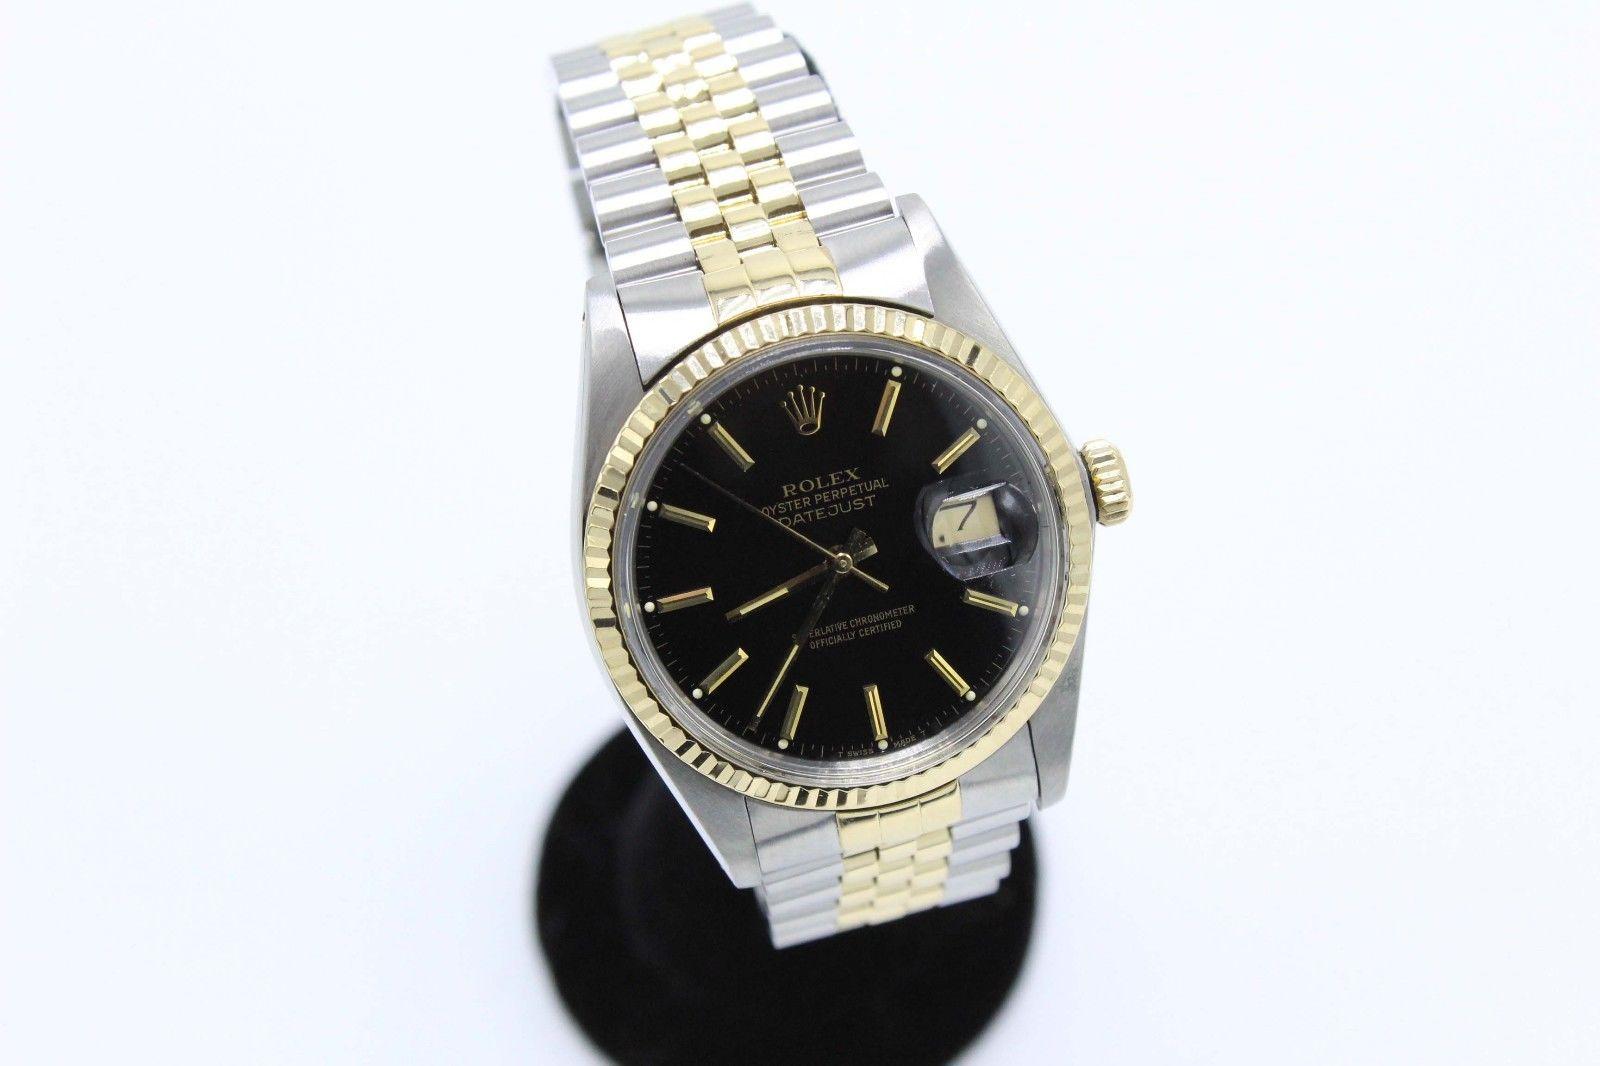 Style Number: 16013
Serial: 8154***
Model: Datejust 
Case Material: 18K Yellow Gold & Stainless Steel
Band: 18K Yellow Gold
Bezel: 18K Yellow Gold
Dial: Black
Face: Acrylic 
Case Size: 36mm
Includes: 
-Elegant Watch Box
-Certified Appraisal 
-6